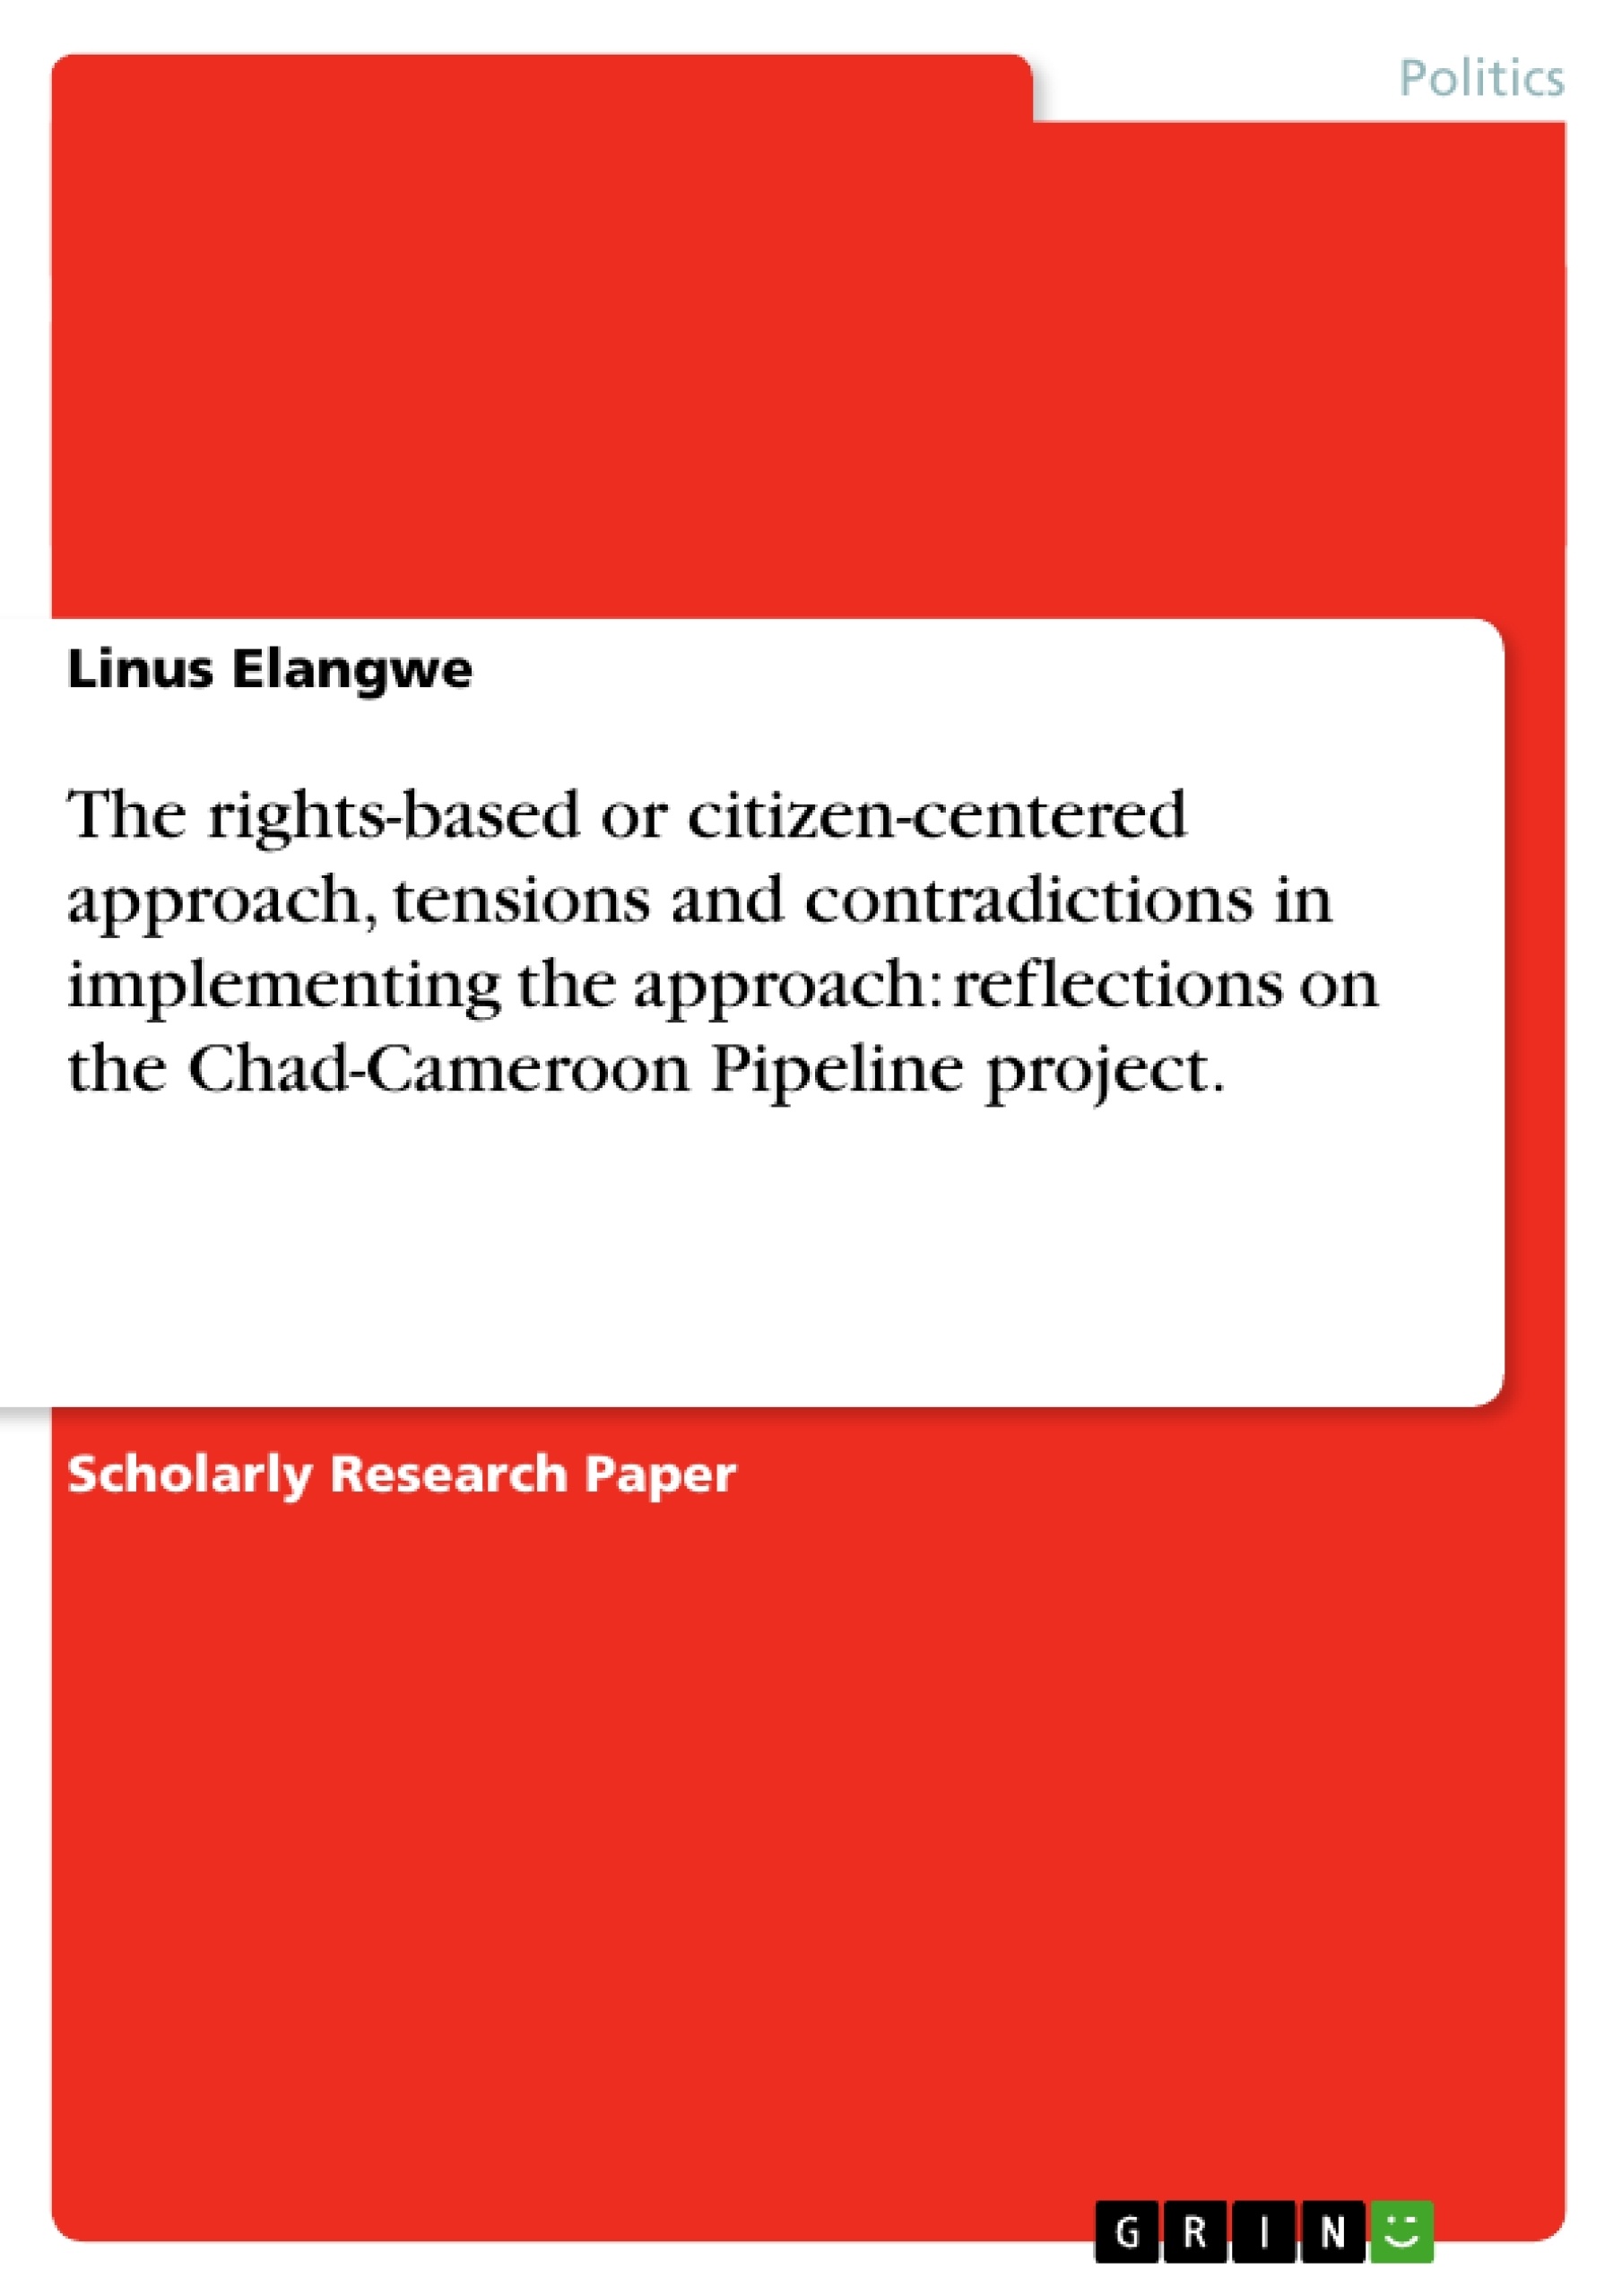 Title: The rights-based or citizen-centered approach, tensions and contradictions in implementing the approach: reflections on the Chad-Cameroon Pipeline project.